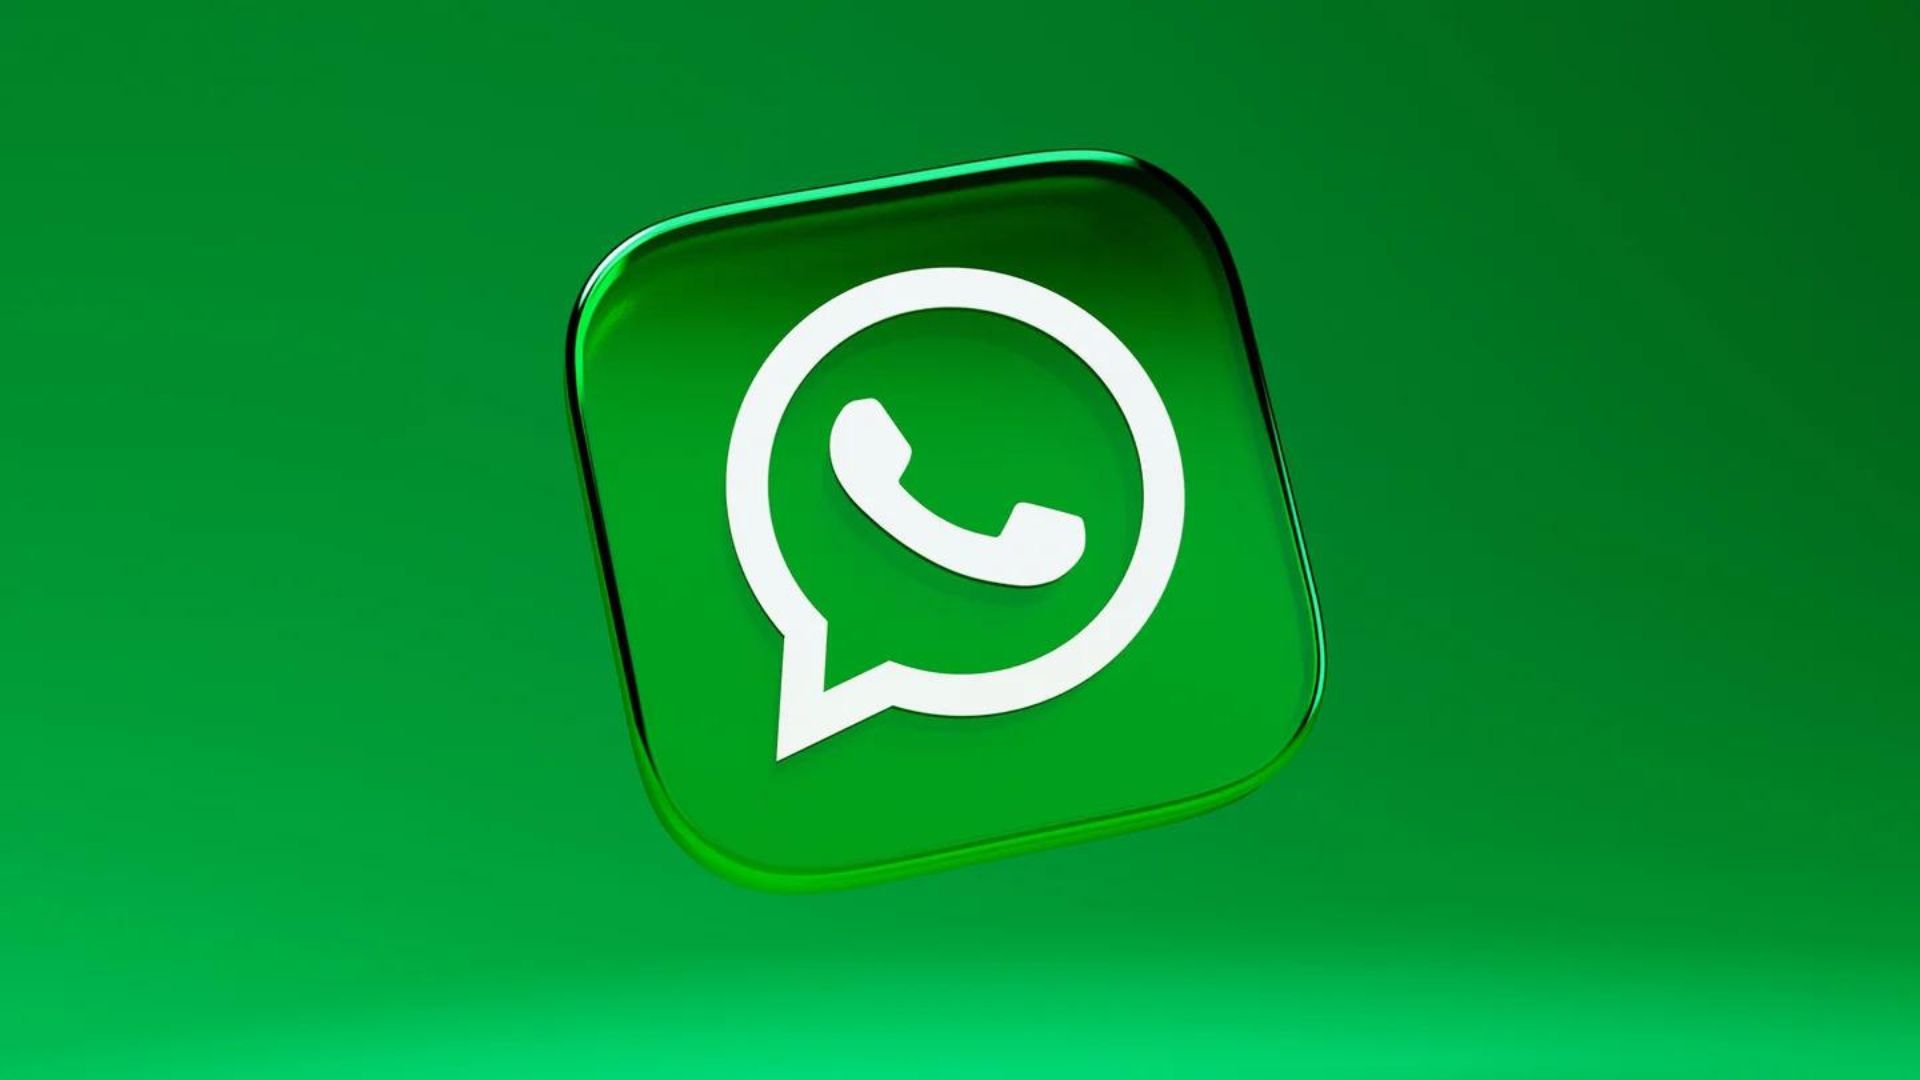 Tech-savvy SC to send info on cases to lawyers, parties on WhatsApp